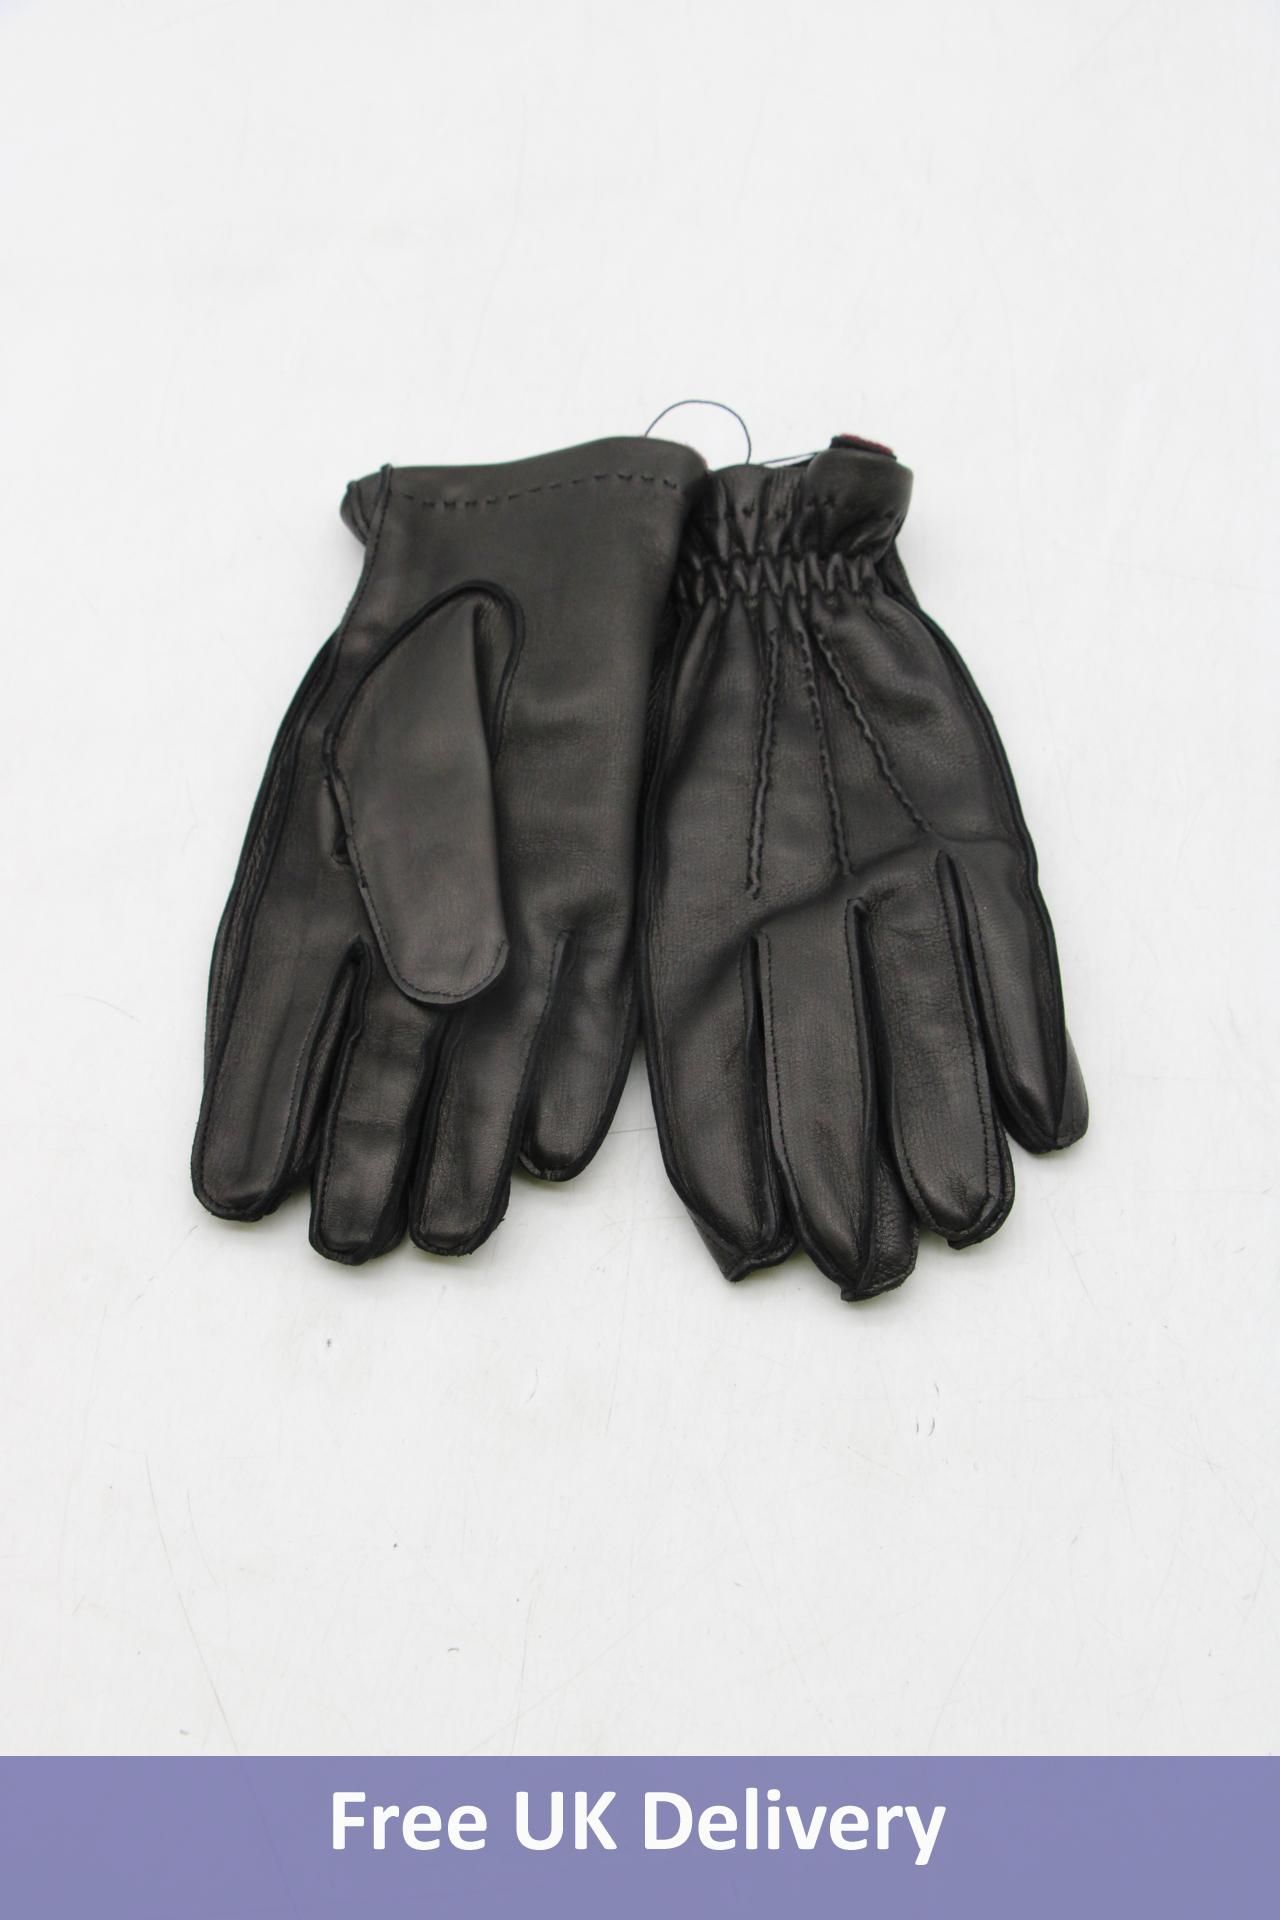 New and Lingwood Deerskin Gloves with Removable Lining, Black Red, Size 9